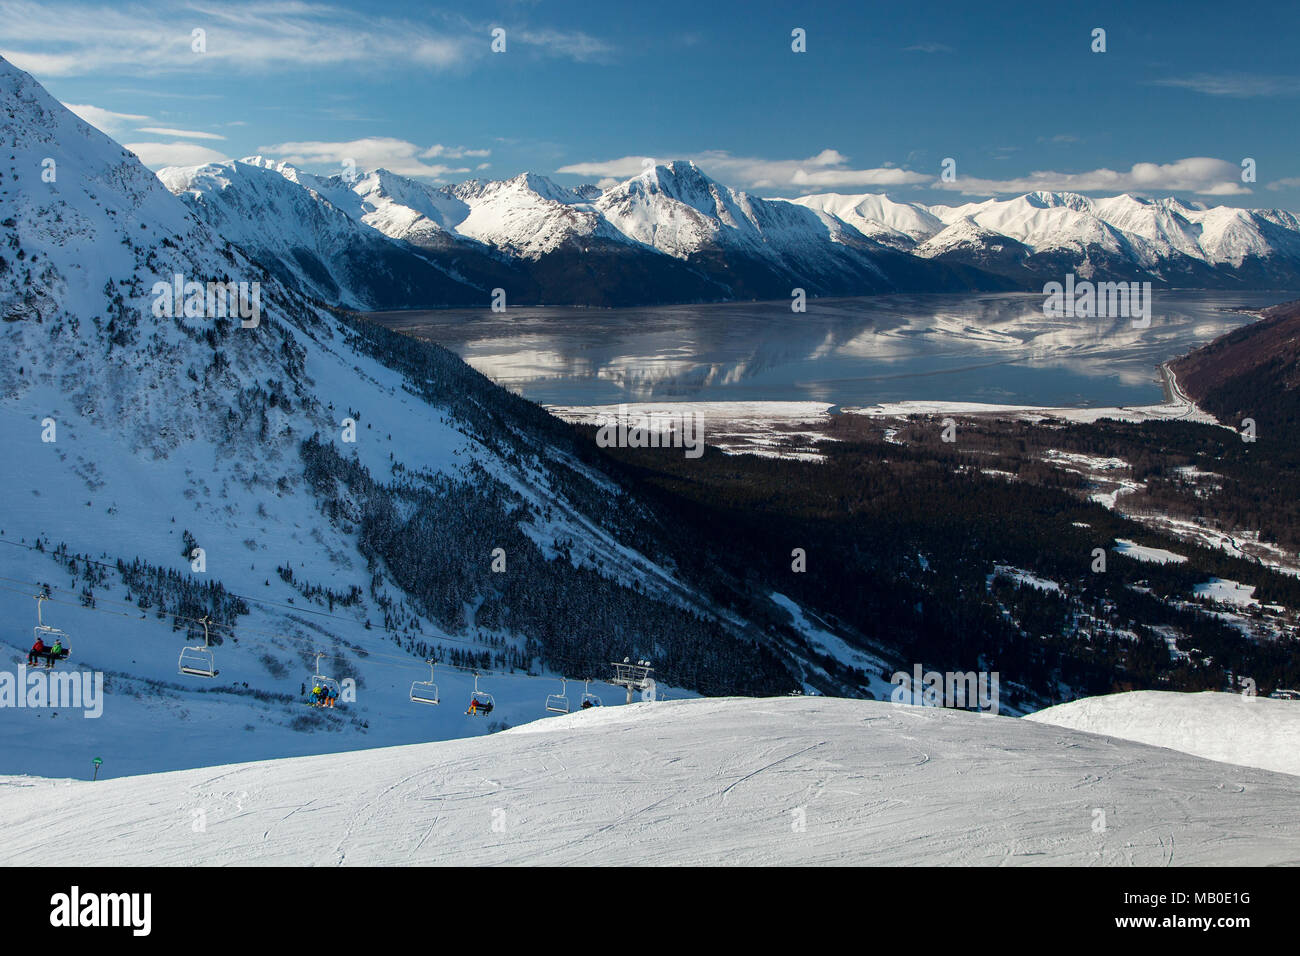 The mountains of the Kenai Peninsula reflect in the calm waters of Turnagain Arm as skiers ride the lift to the top of the run at Alyeska Ski Resort. Stock Photo